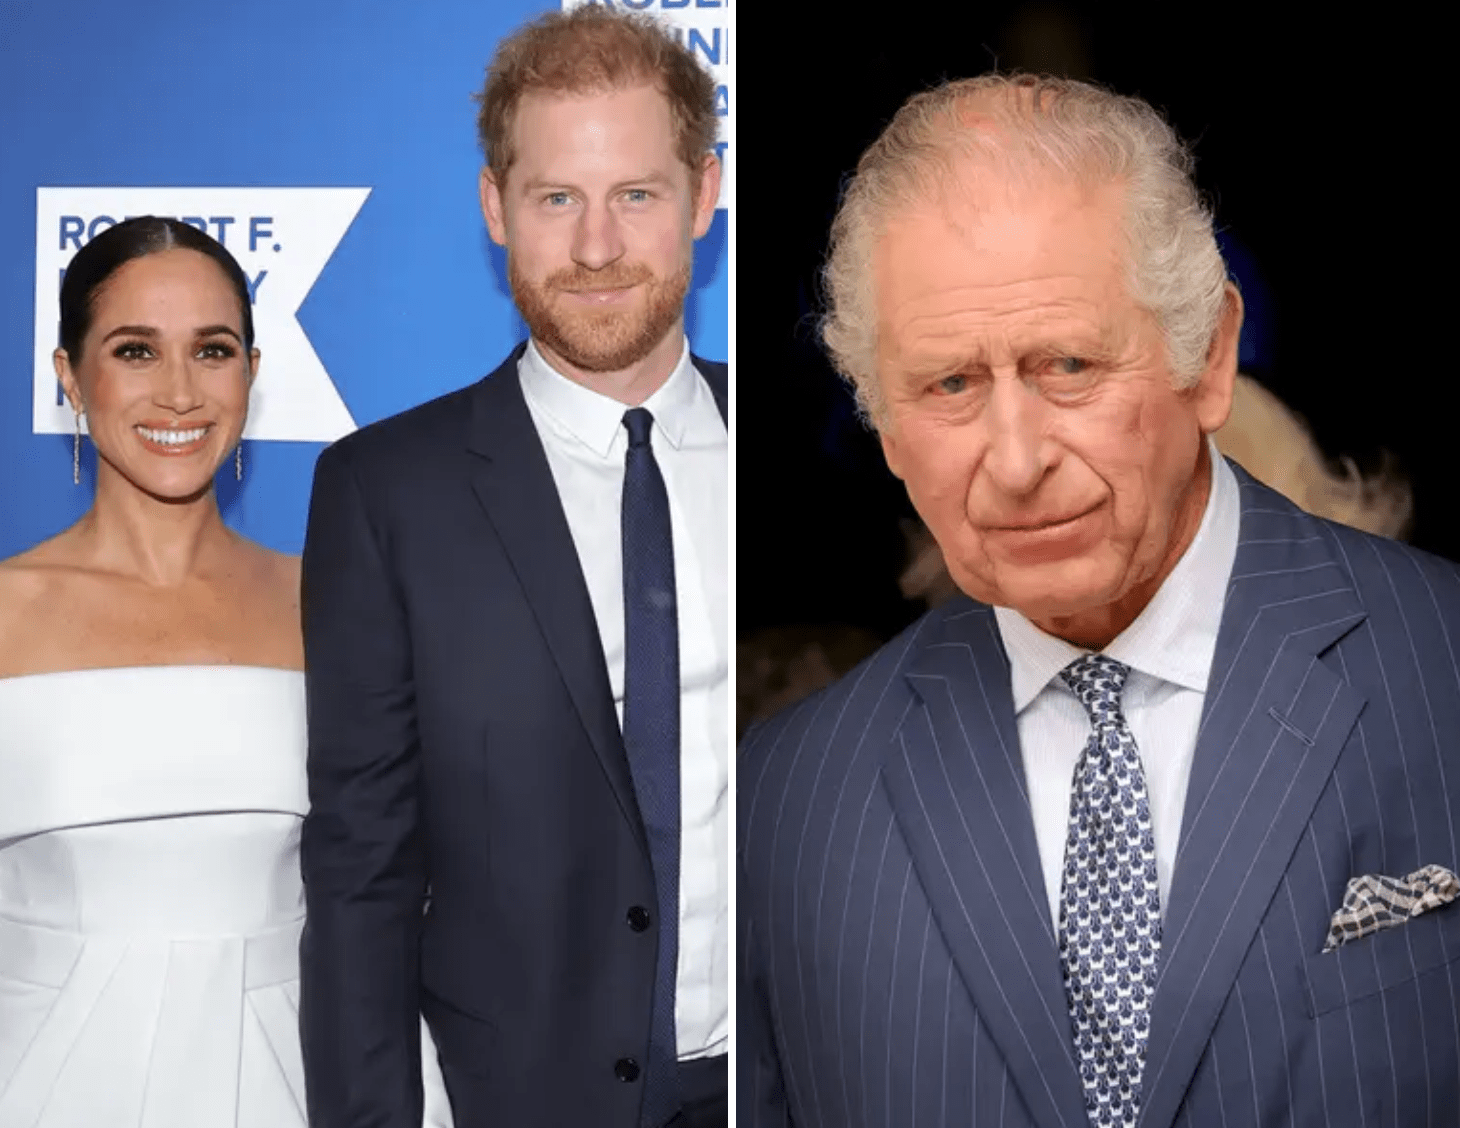 Prince Harry Will Attend King Charles’s Coronation Without Meghan Markle And Their Children